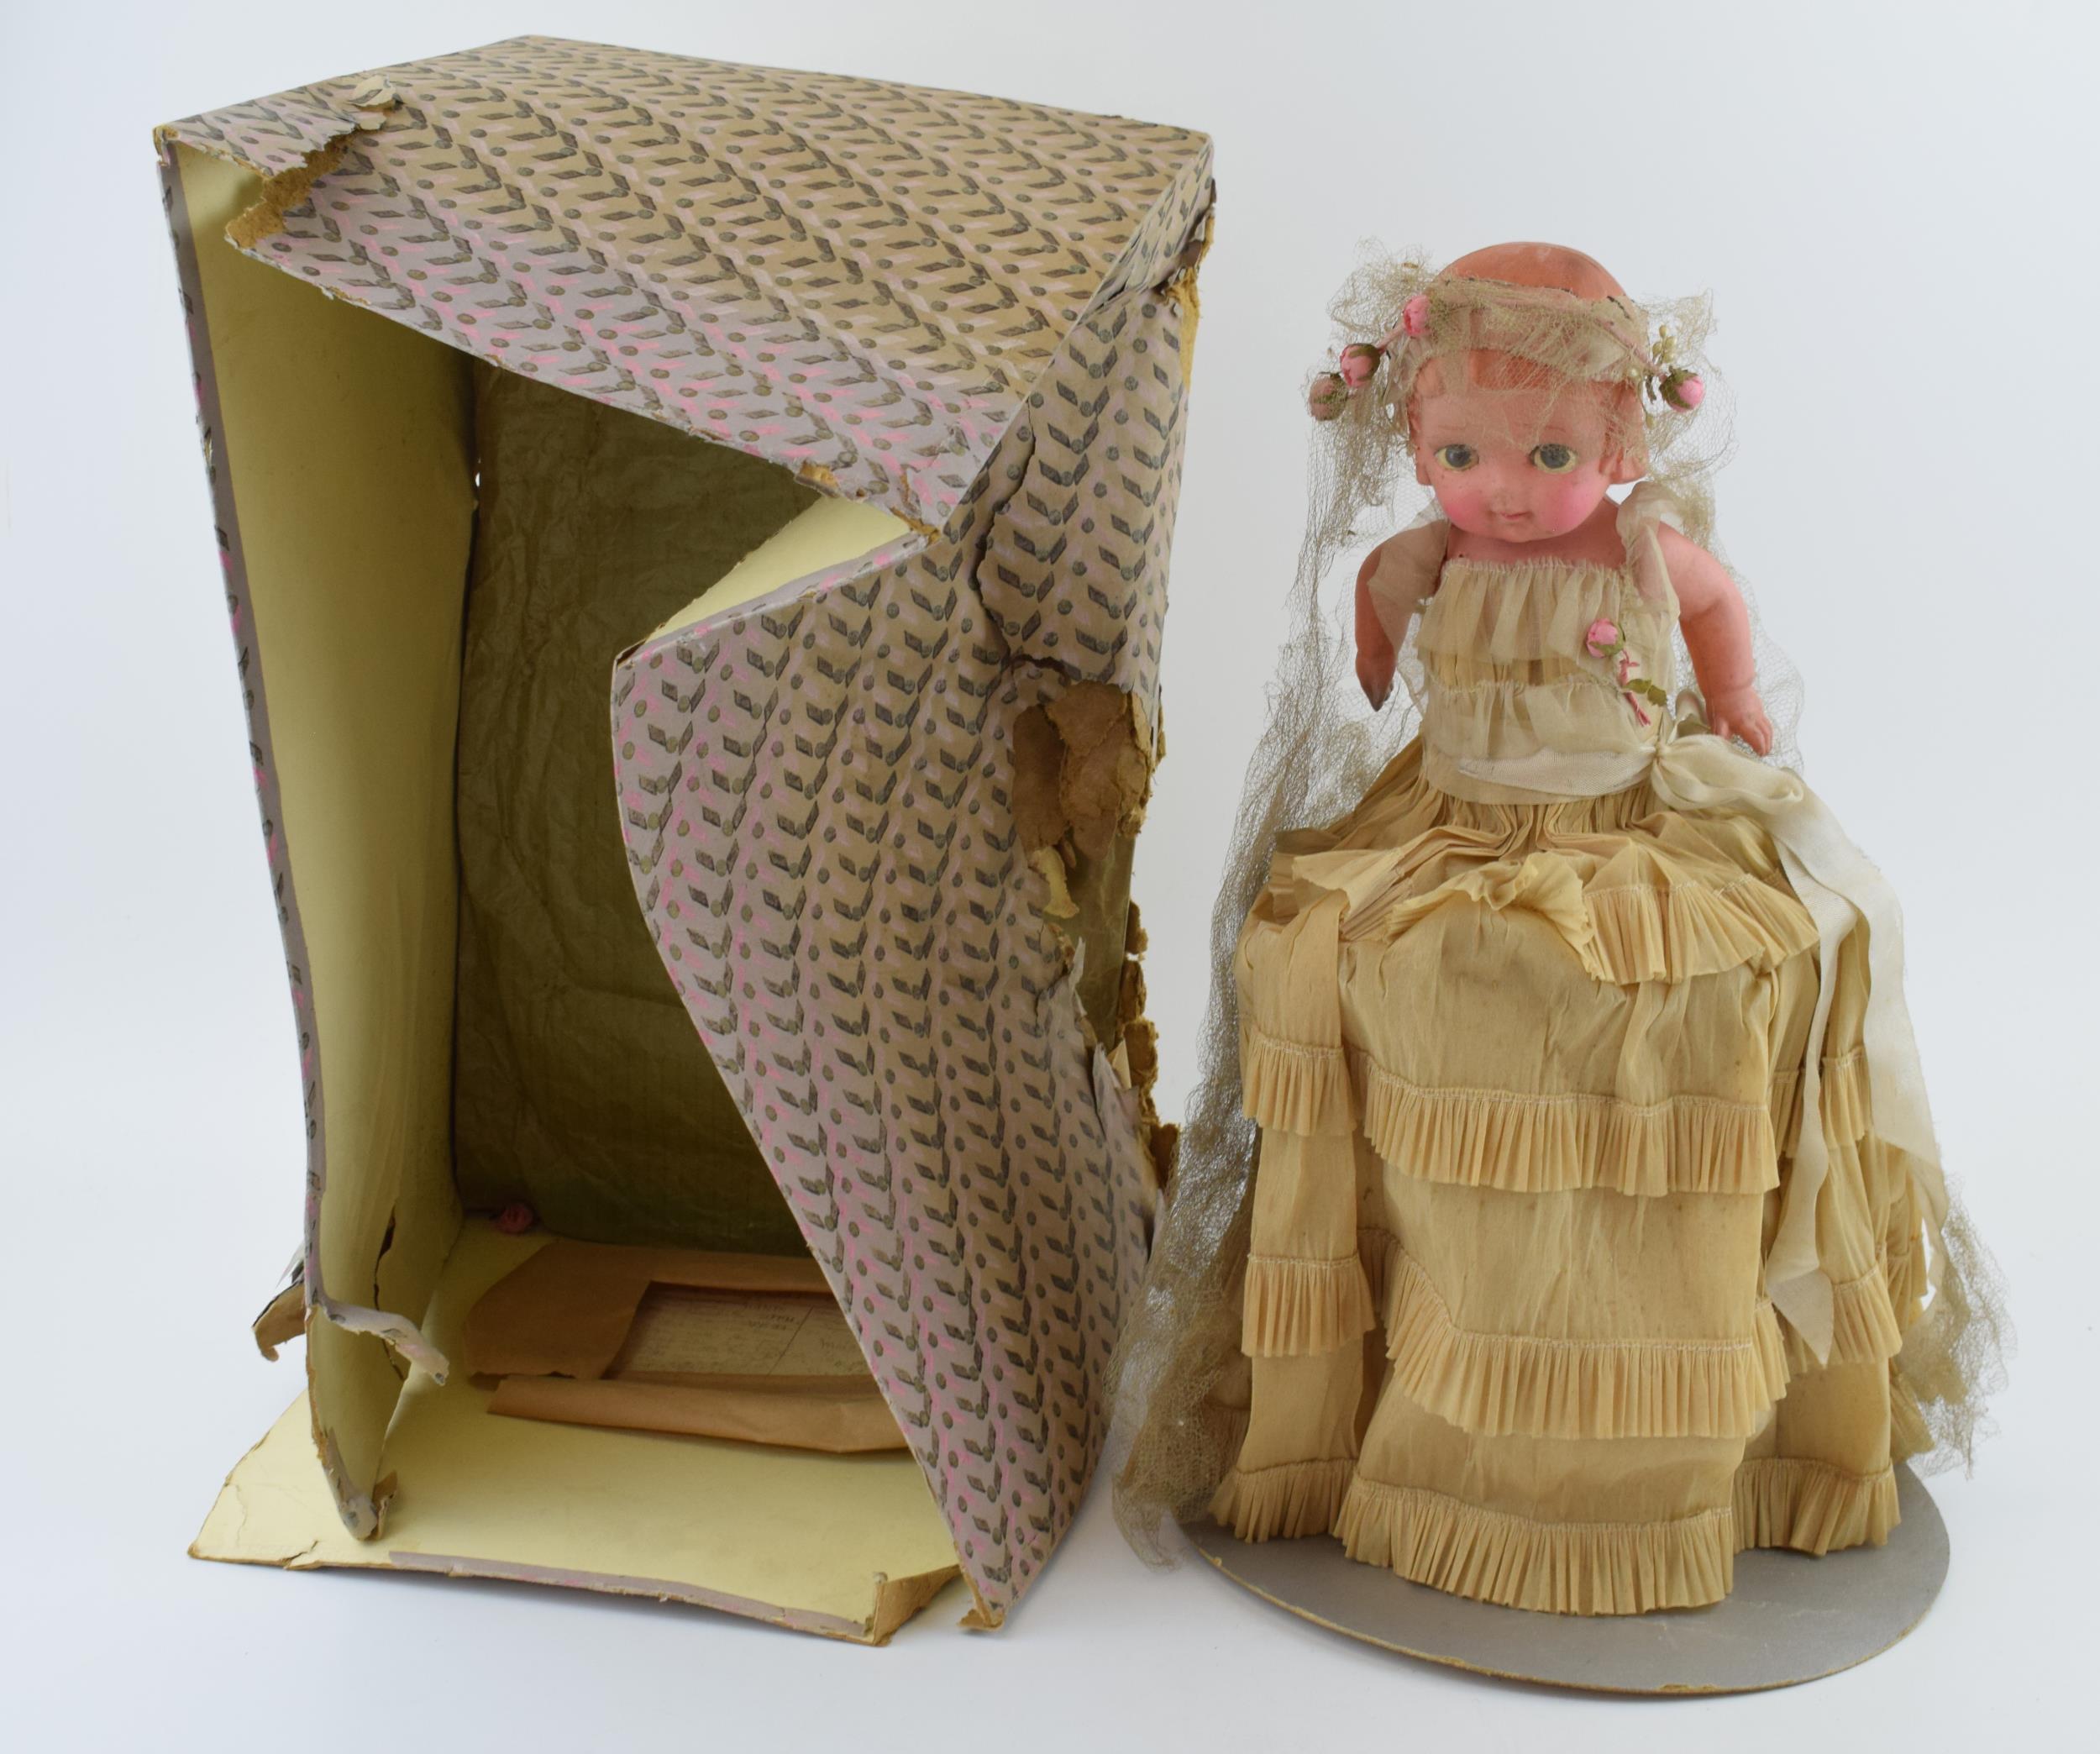 Boxed doll with paper dress, made in England, 'Pomeranian'. Height 40cm. Doll has survived well.